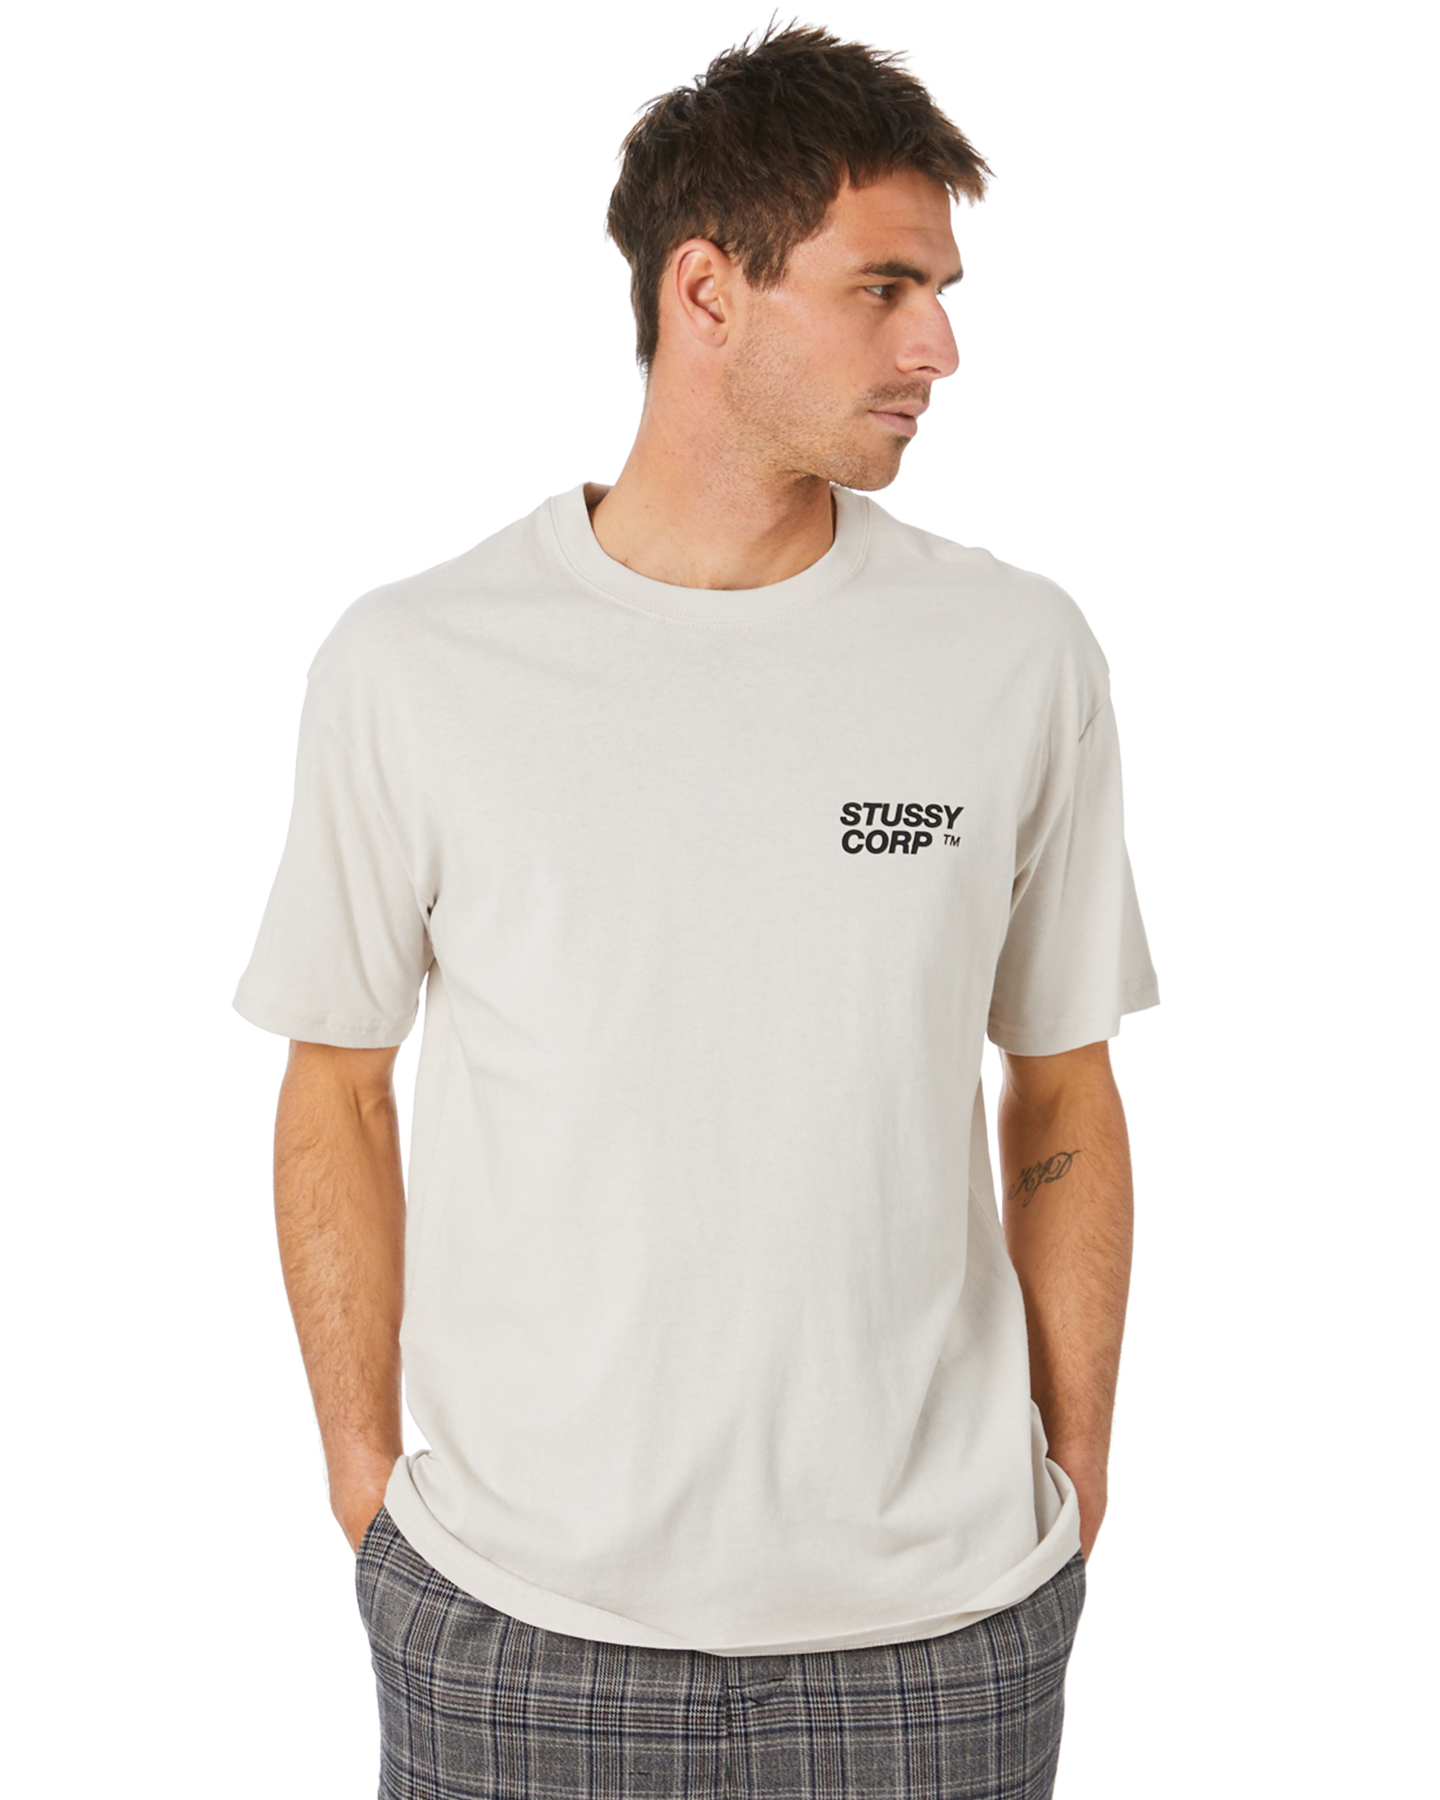 Stussy Stussy Corp Mens Ss Tee - White Sand | SurfStitch